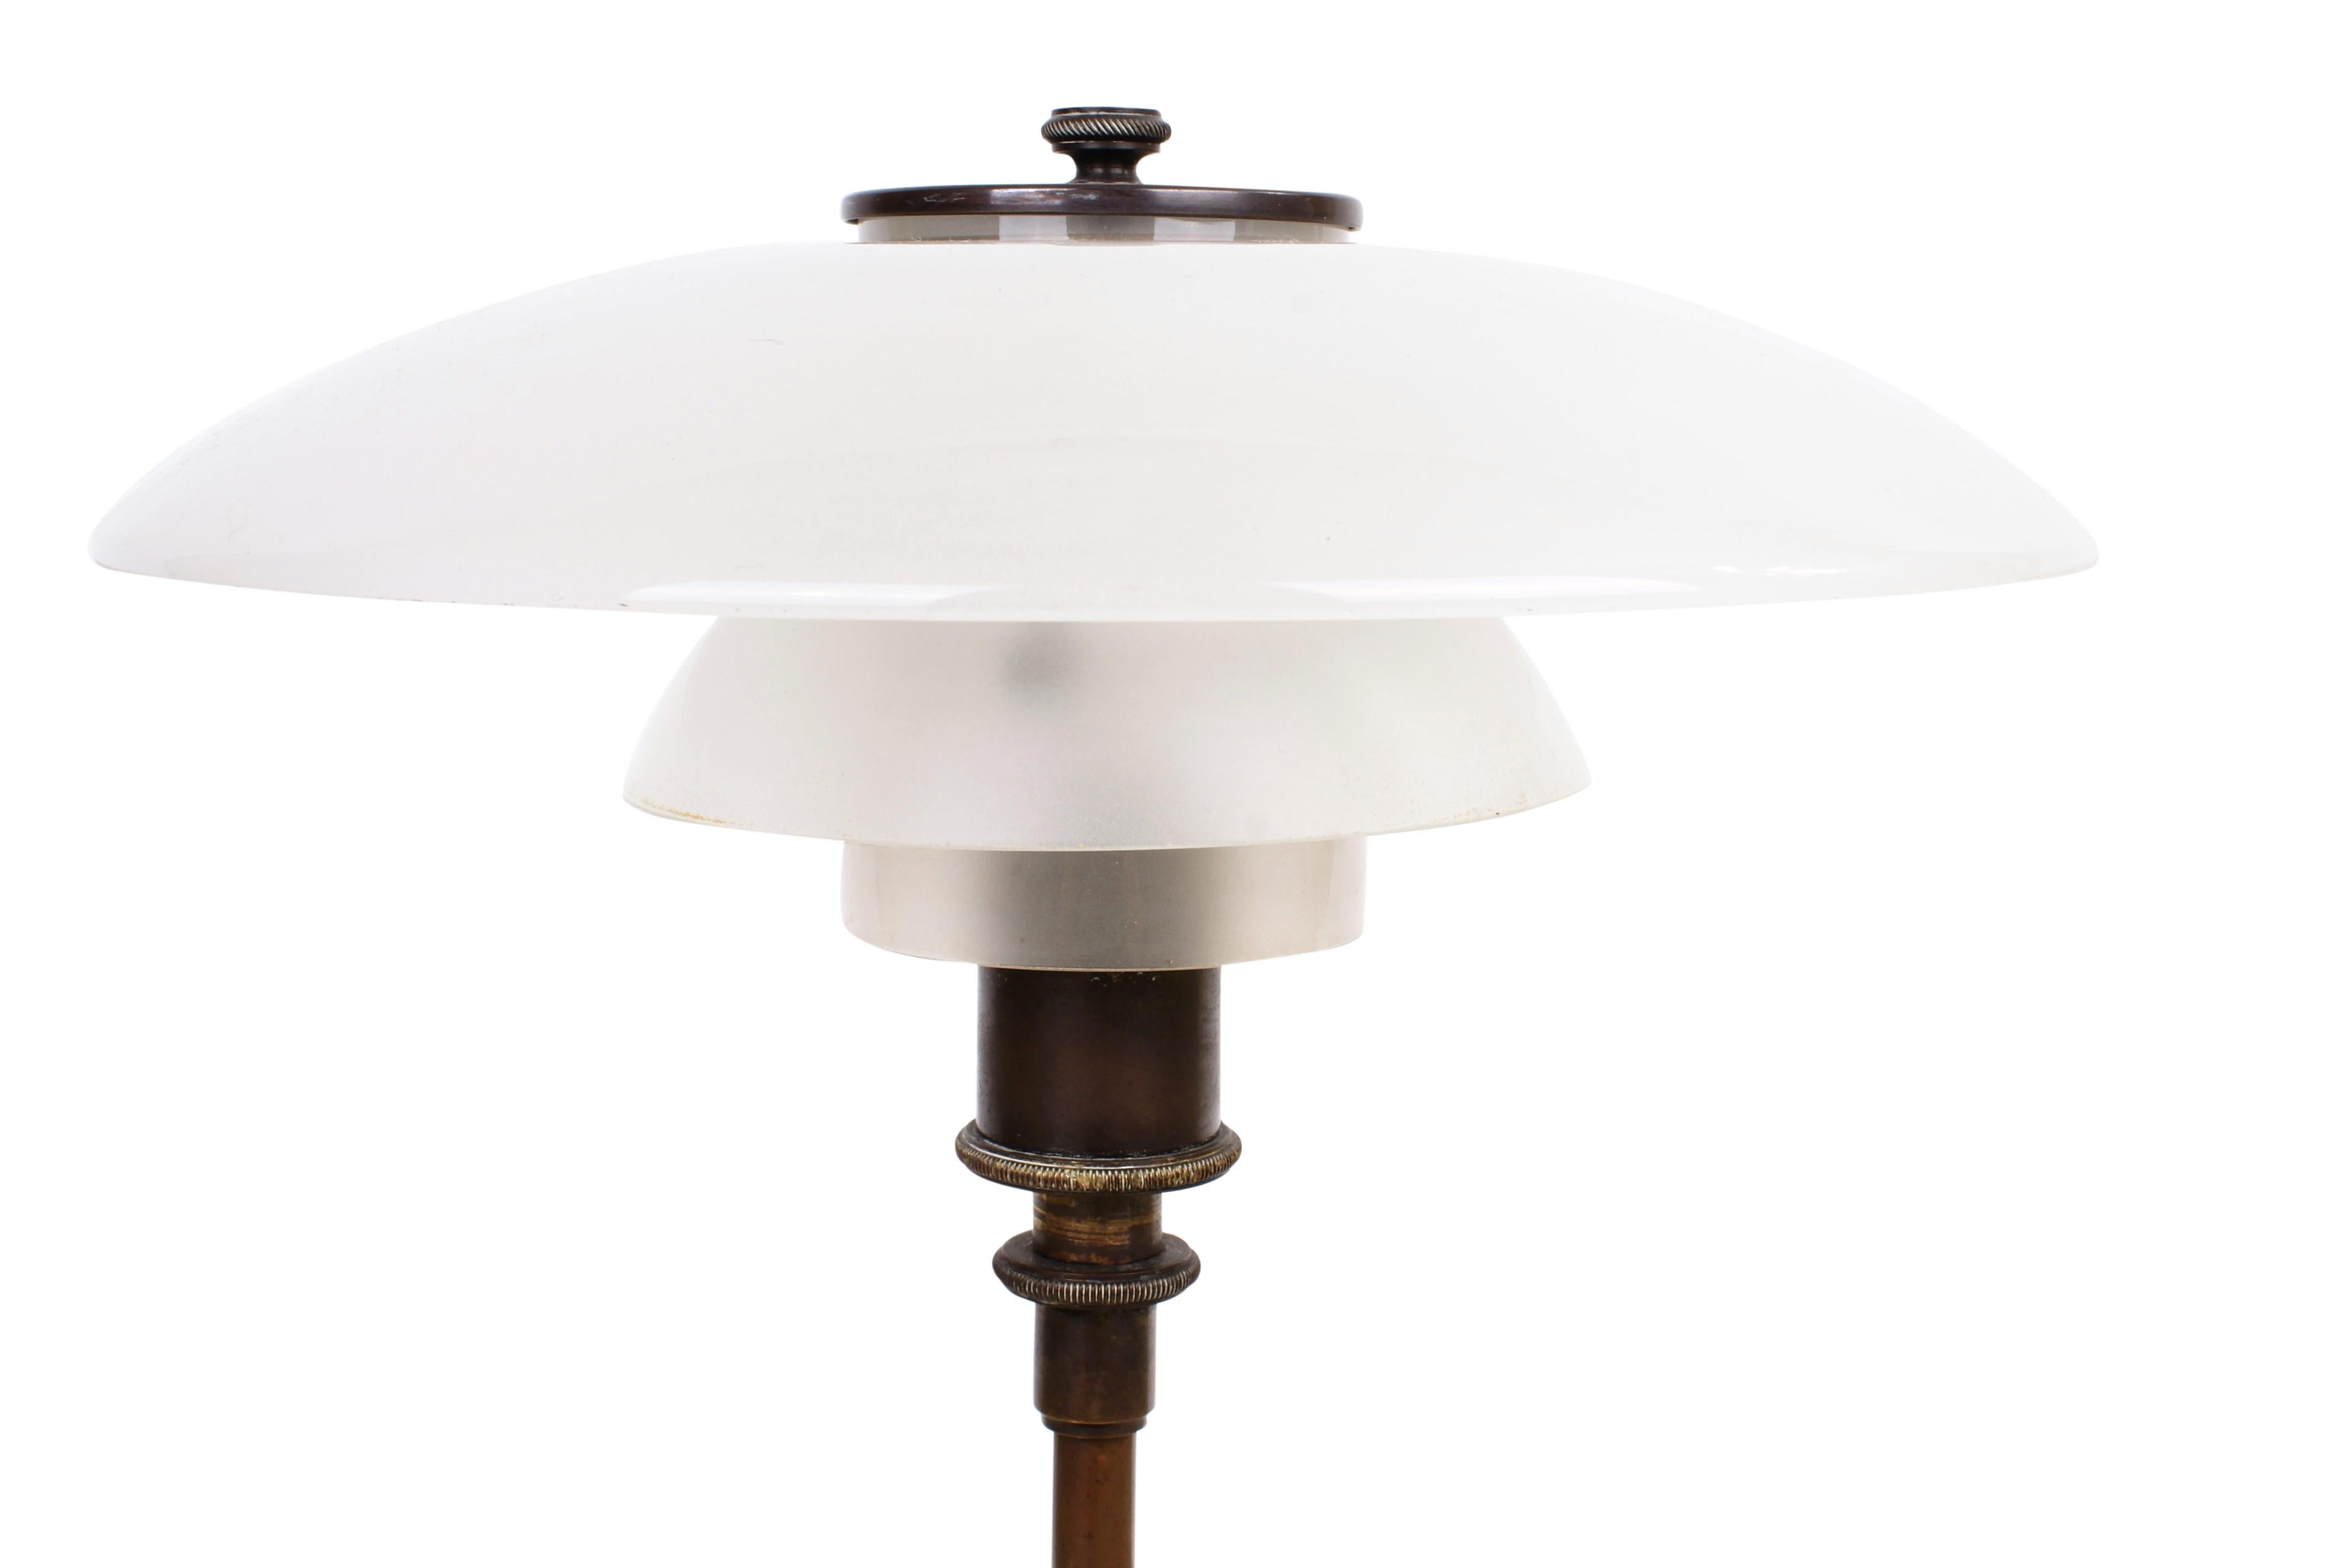 Poul Henningsen 3/2 desk lamp with base in brown brass and shades in original opaque glass. Top of base is stamped 